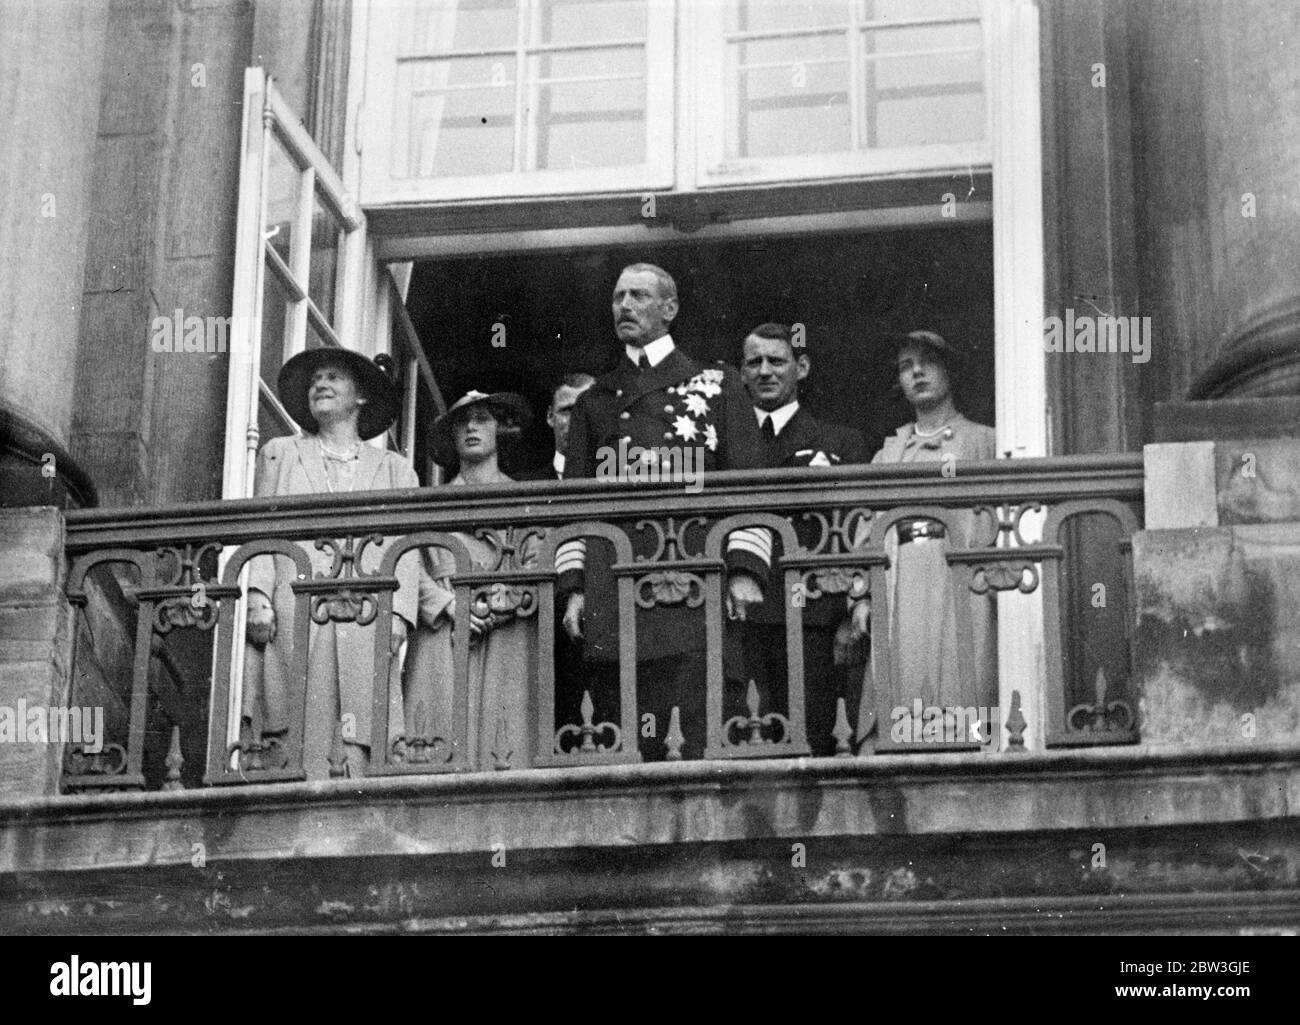 King of Denmark addresses 40000 farmers from Royal Palace , with Royal Family on Balcony . Forty thousand farmers from all parts of Denmark marched to the Royal Palace of Amalienborg at Copenhagen to lay a number of demands before King Christian . 30 July 1935 Stock Photo